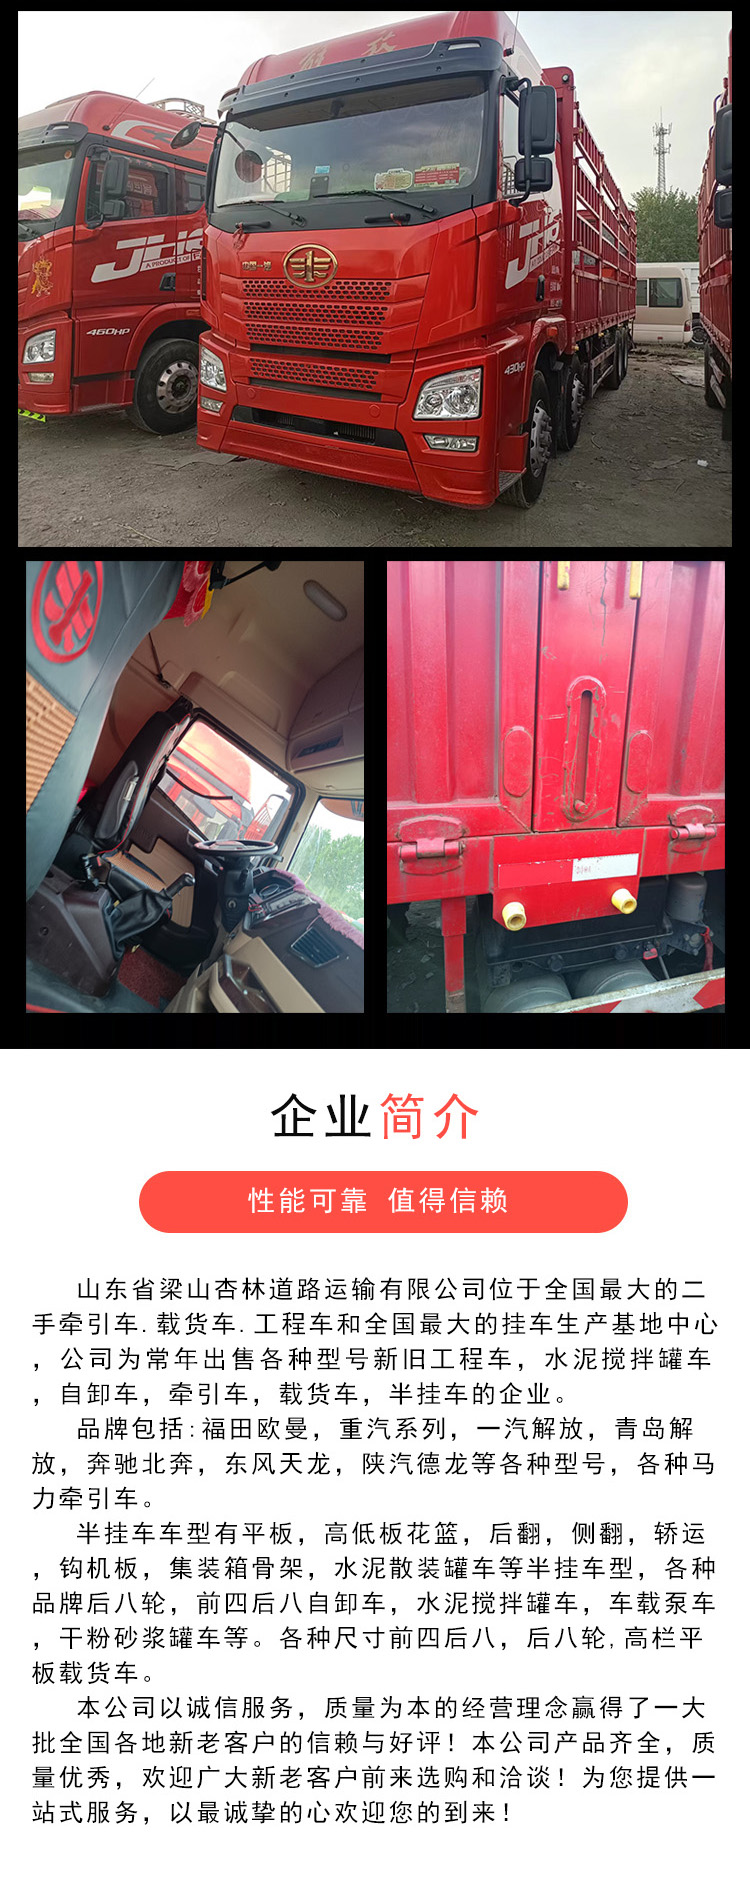 Used 6.8-meter high hurdle truck with 240 horsepower German Mann engine from China National Heavy Duty Truck Haowo Green